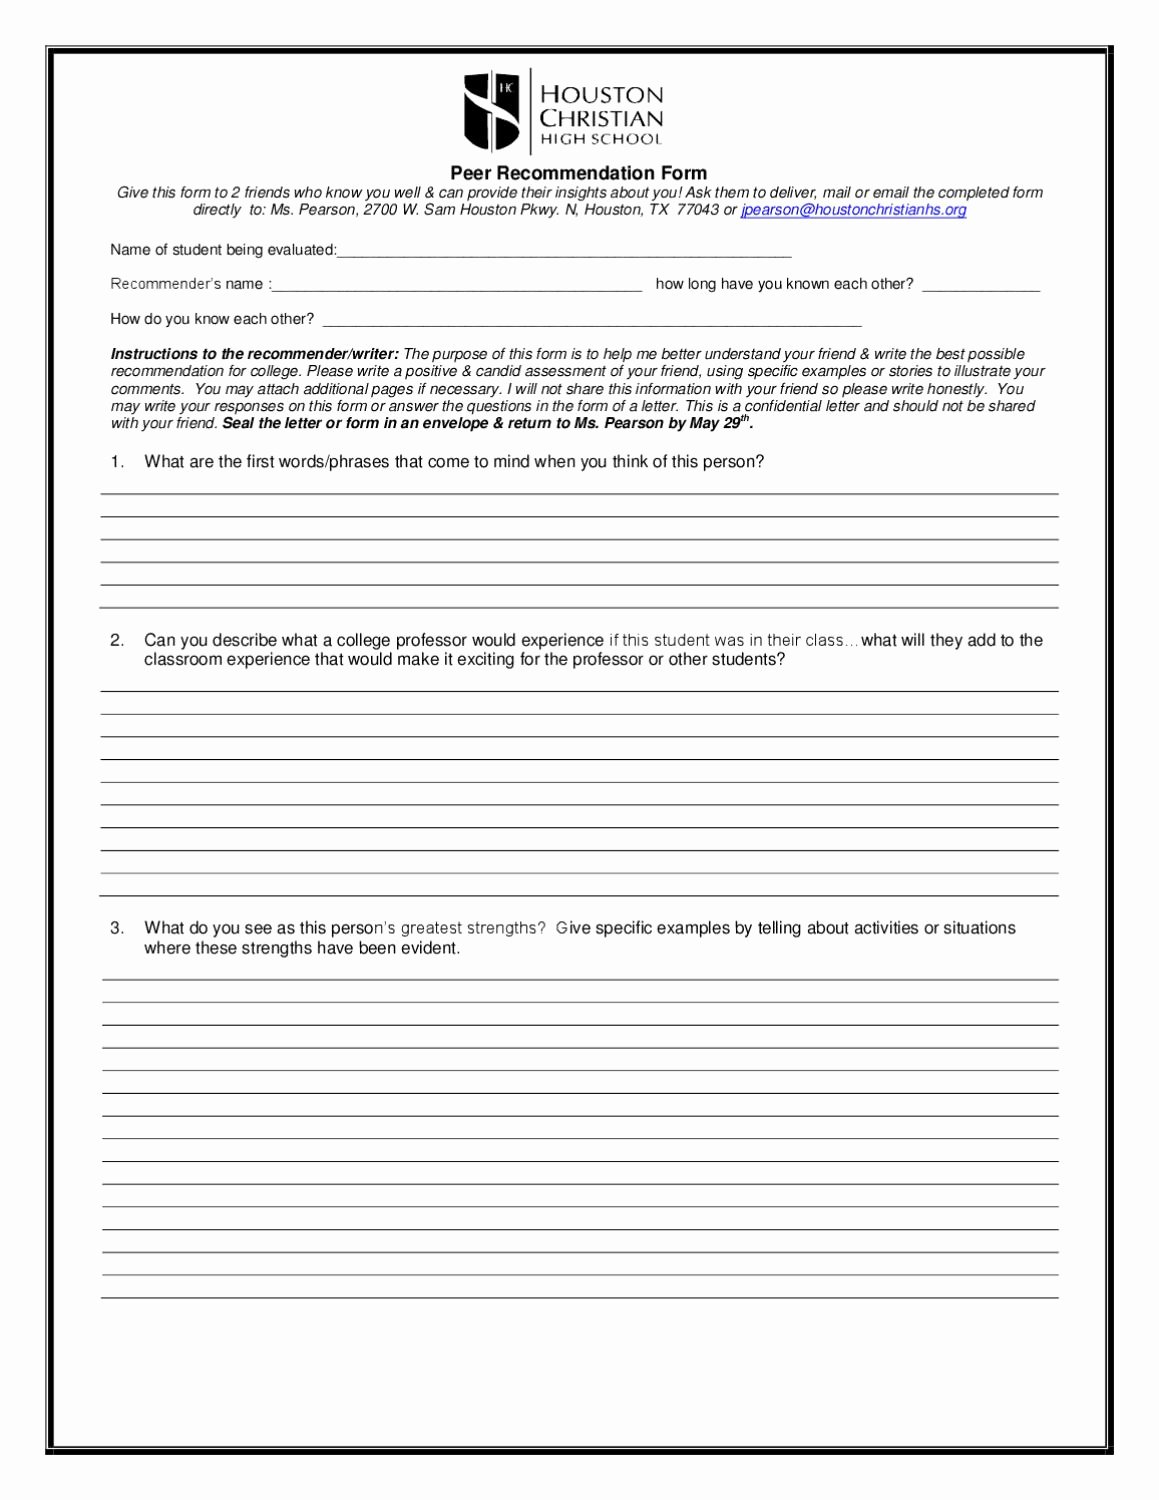 Letter Of Recommendation Peer Lovely Peer Re Mendation form by Hc Munications issuu